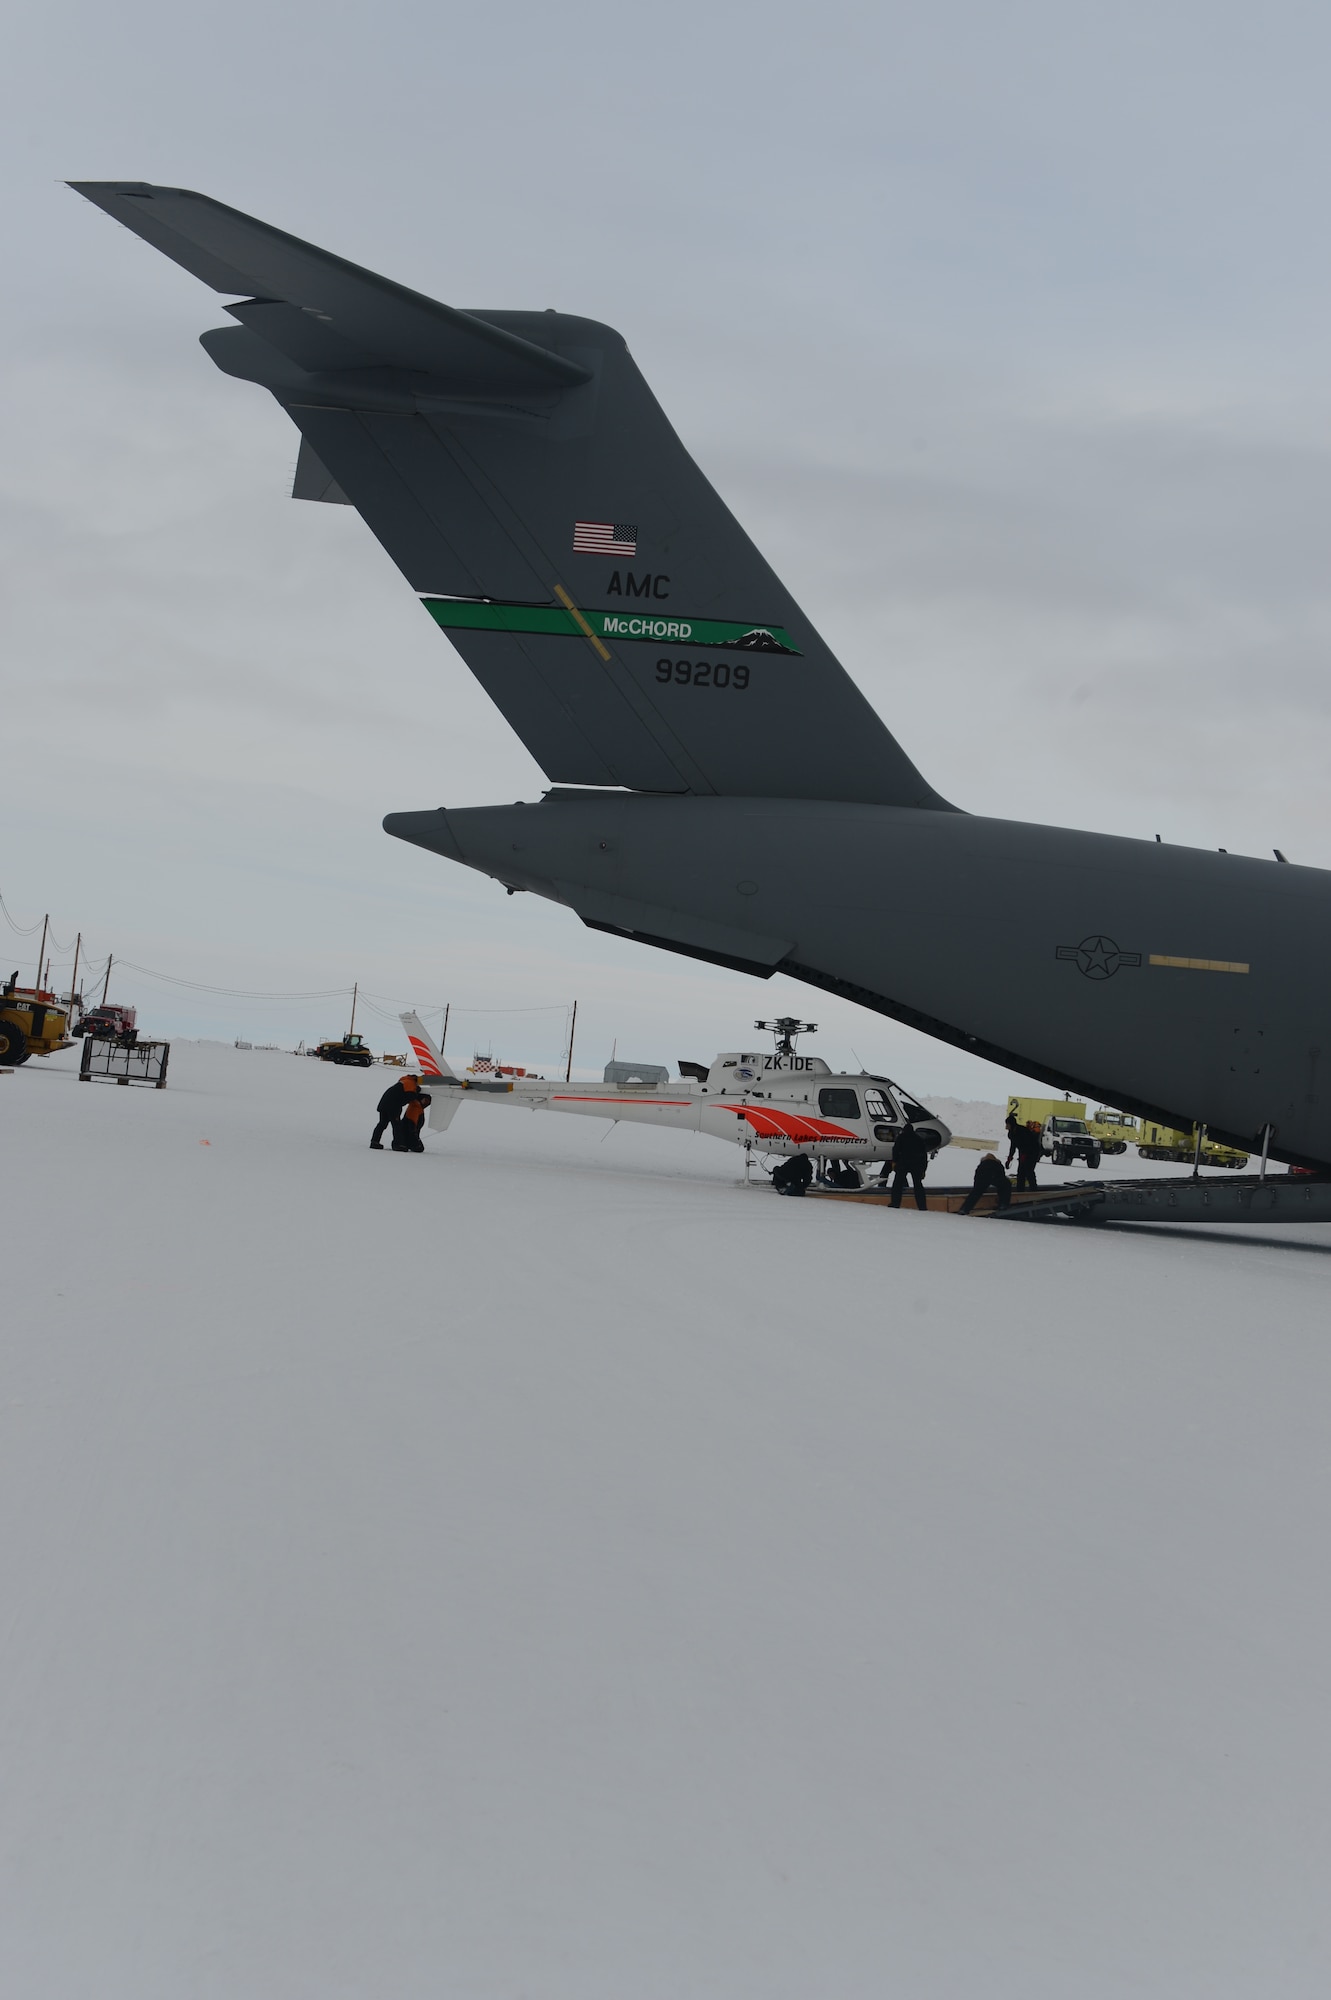 An Eurocopter AS350 B2 single engine helicopter without its blades attached, is offloaded from the back of a McChord Field C-17 Globemaster III aircraft, Oct. 8th, 2014 at the Pegasus White Ice runway, part of McMurdo Station, Antarctica. The helicopter’s blades were attached and it took off before the C-17 departed the station. (U.S. Air Force photo/Master Sgt. Todd Wivell)